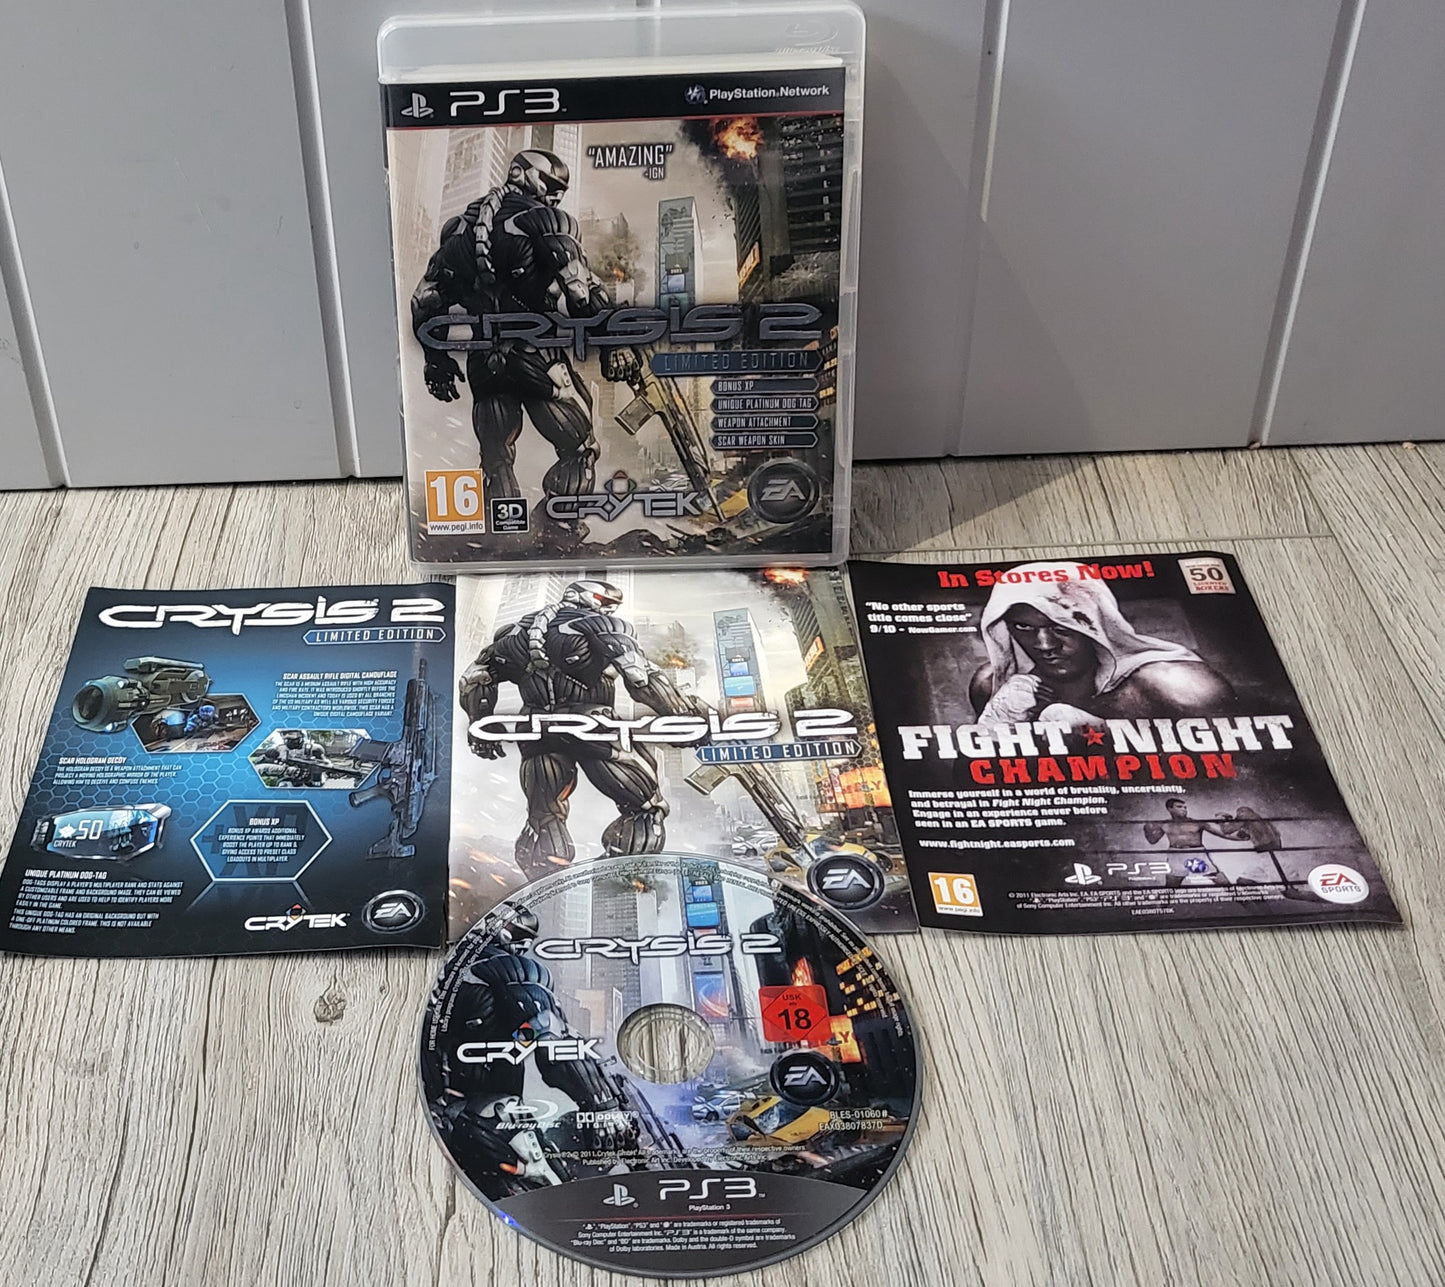 Crysis 2 Limited Edition Sony Playstation 3 (PS3) Game